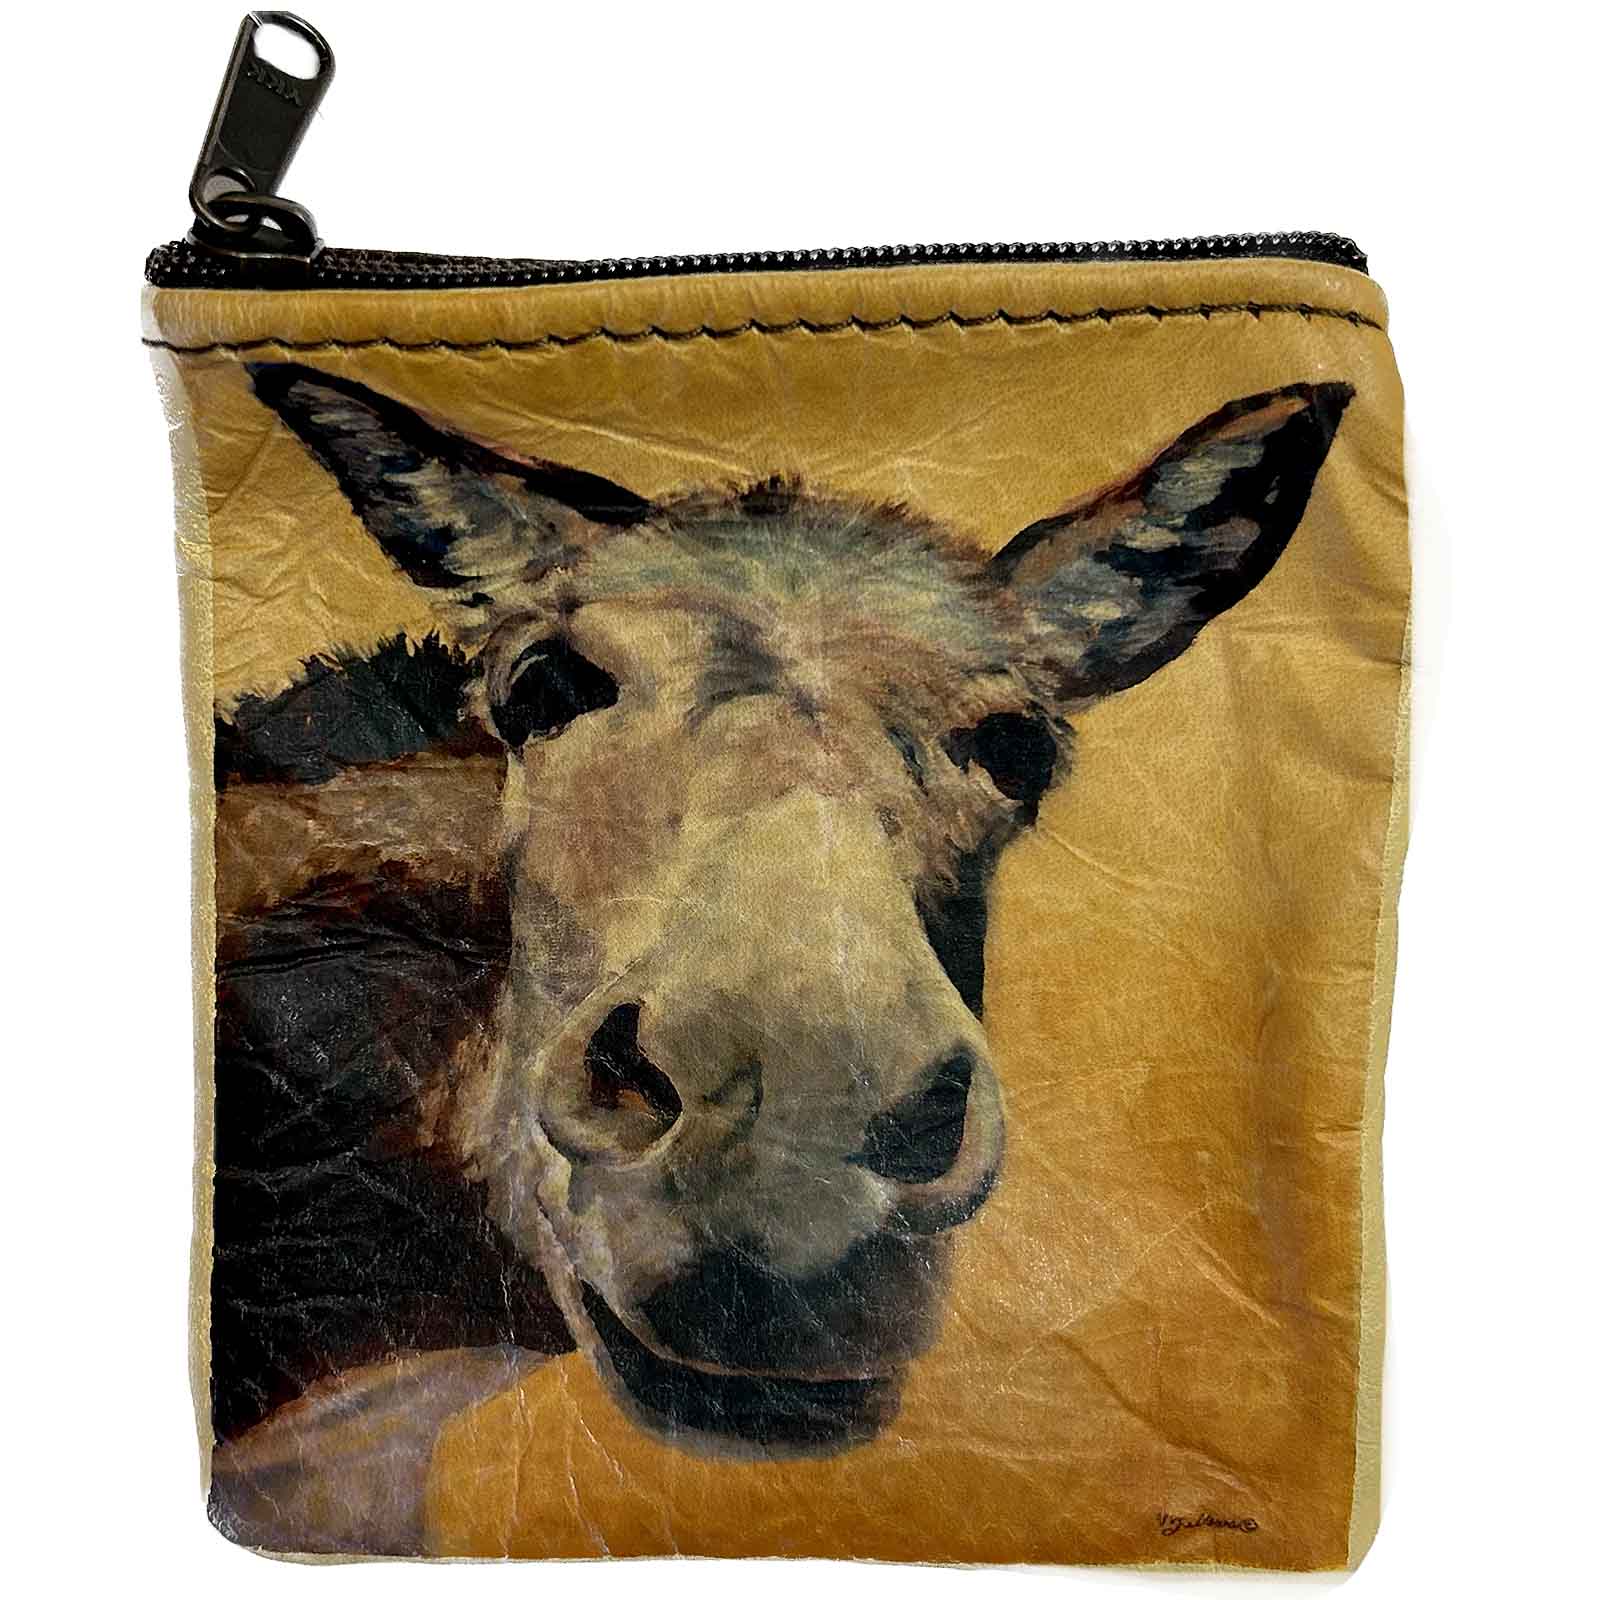 Donkey Rescue Me Leather Western Coin Purse